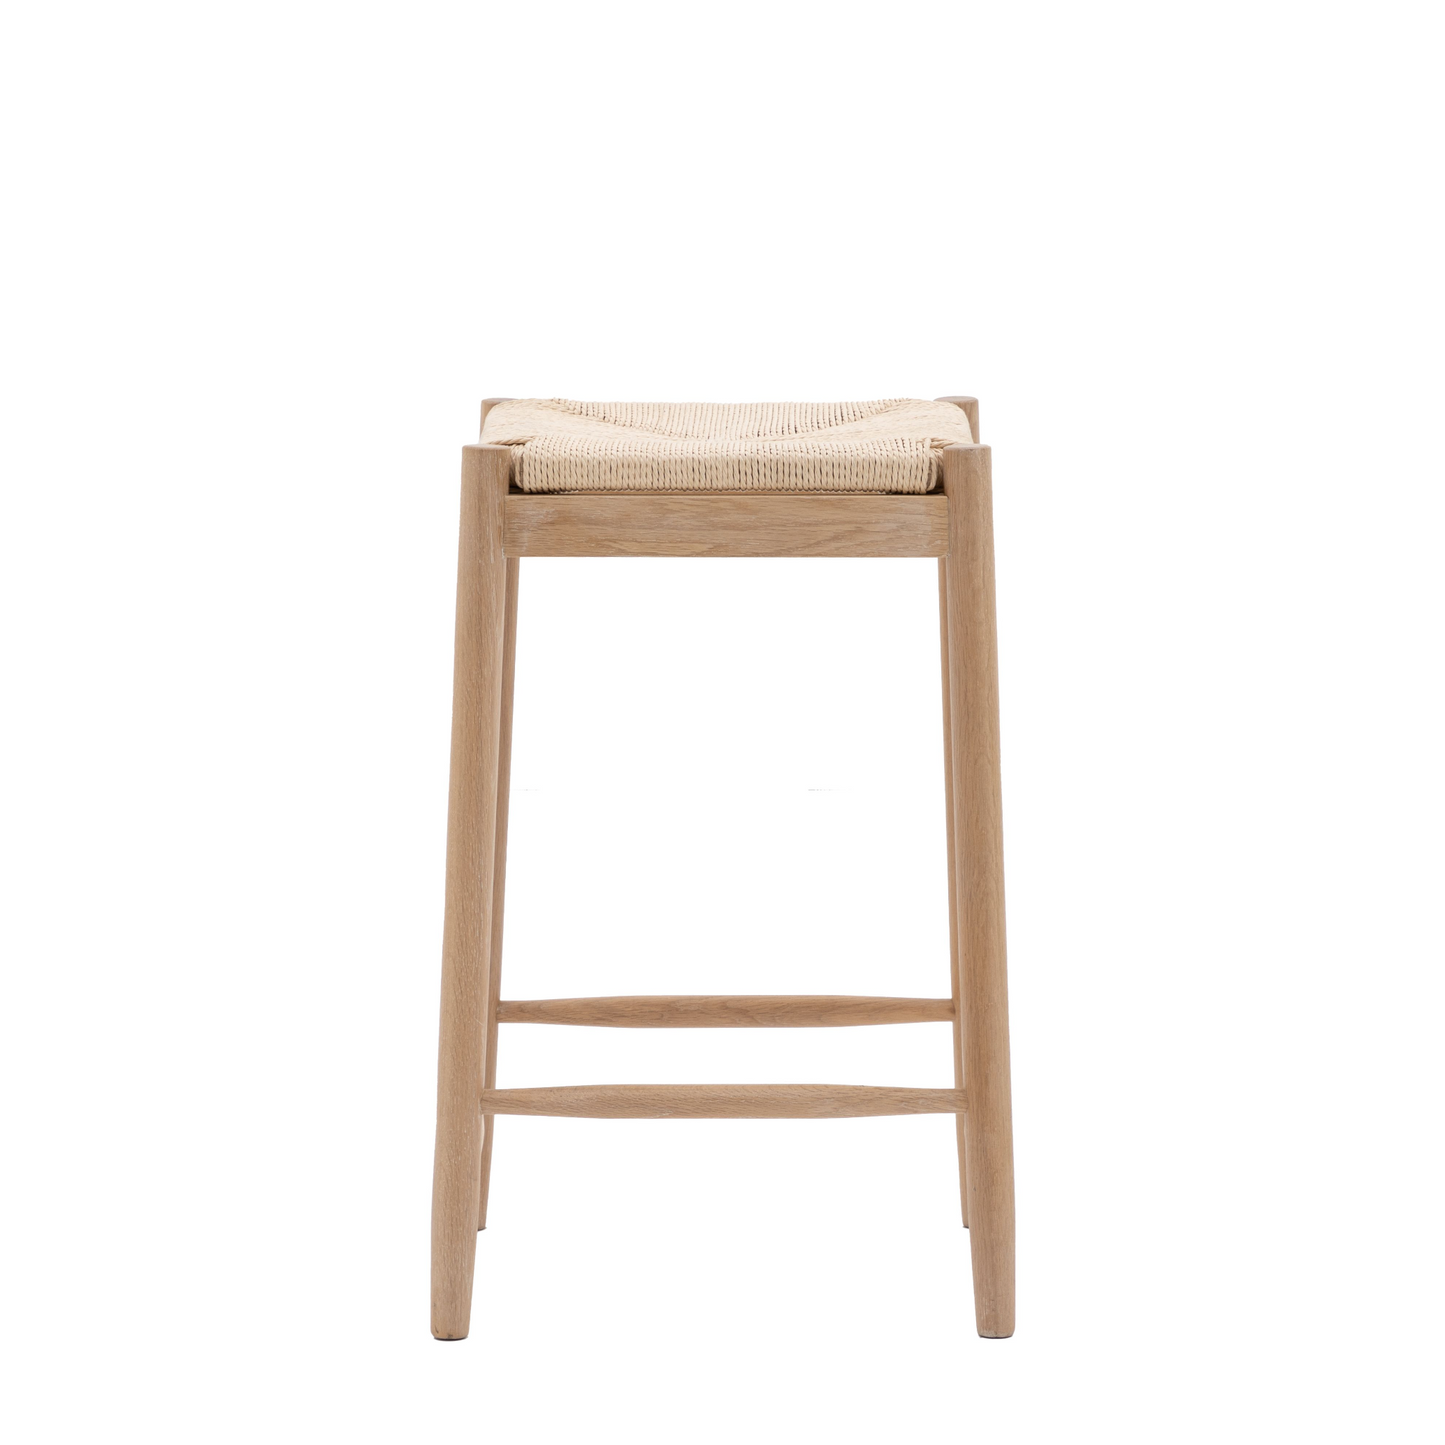 Load image into Gallery viewer, A home furniture piece with a woven seat, the Buckland Oak Stool adds to interior decor.
